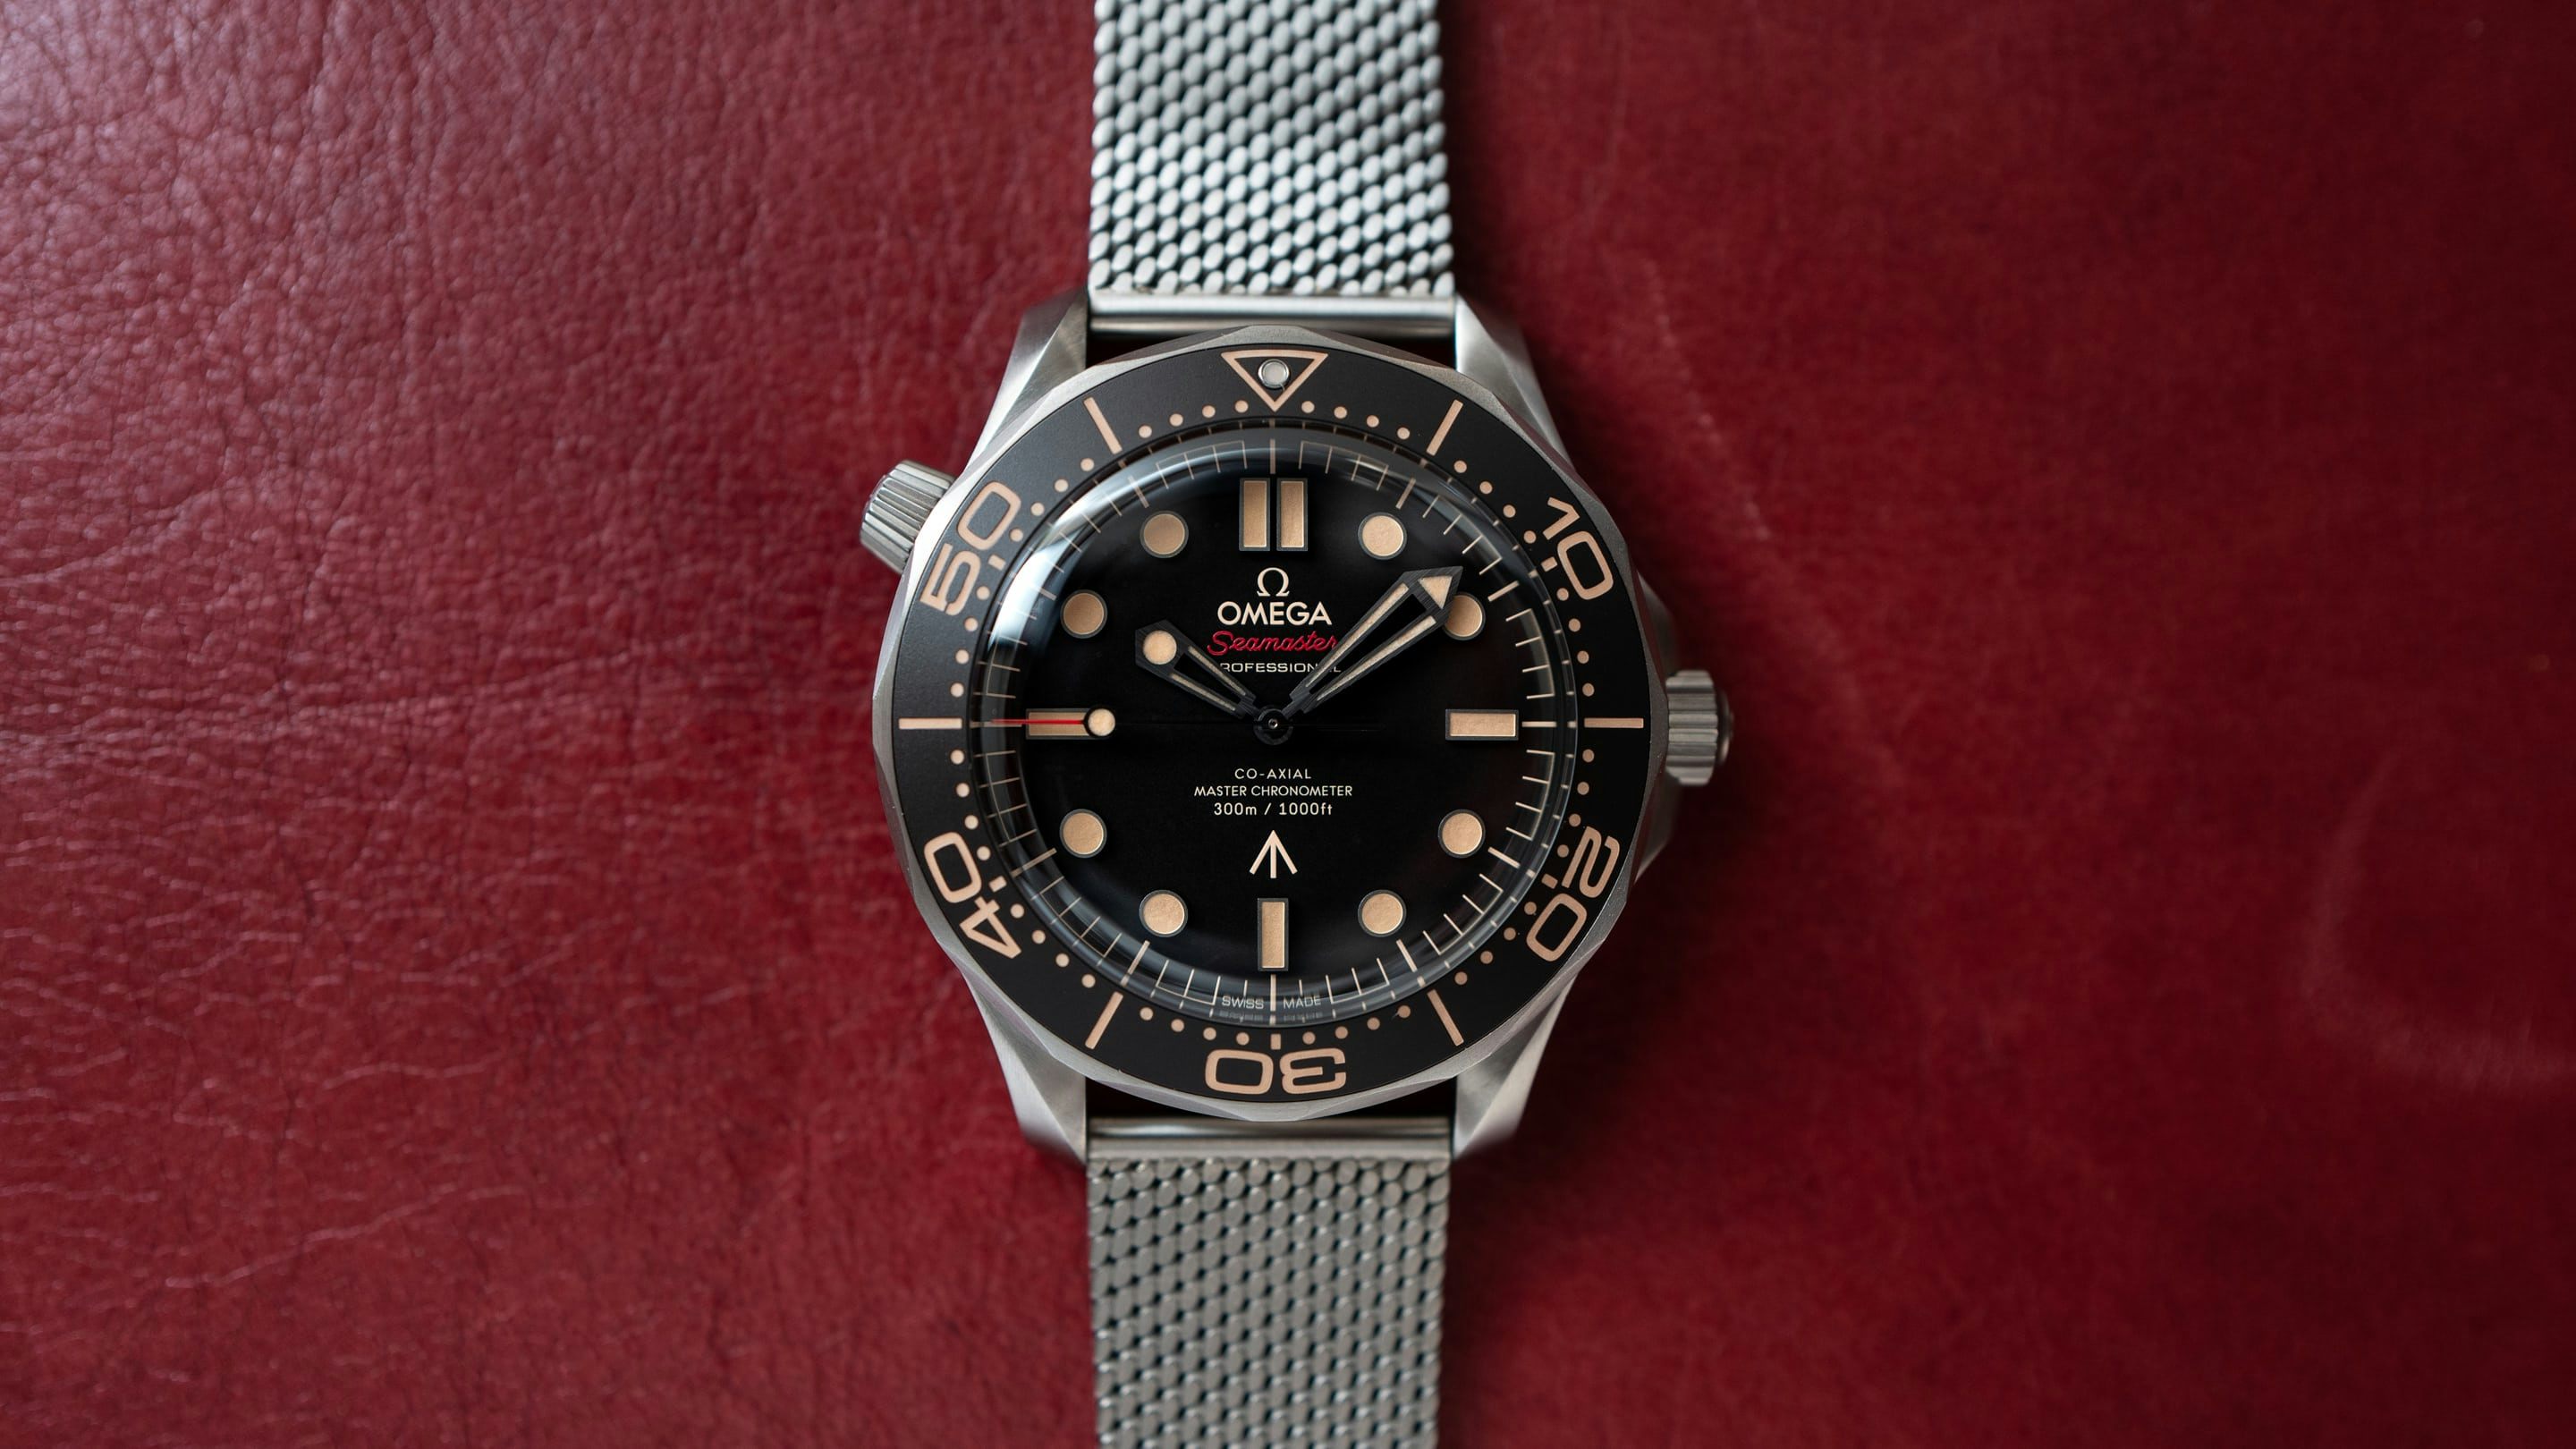 What's the deal with the Seamaster from No Time To Die?